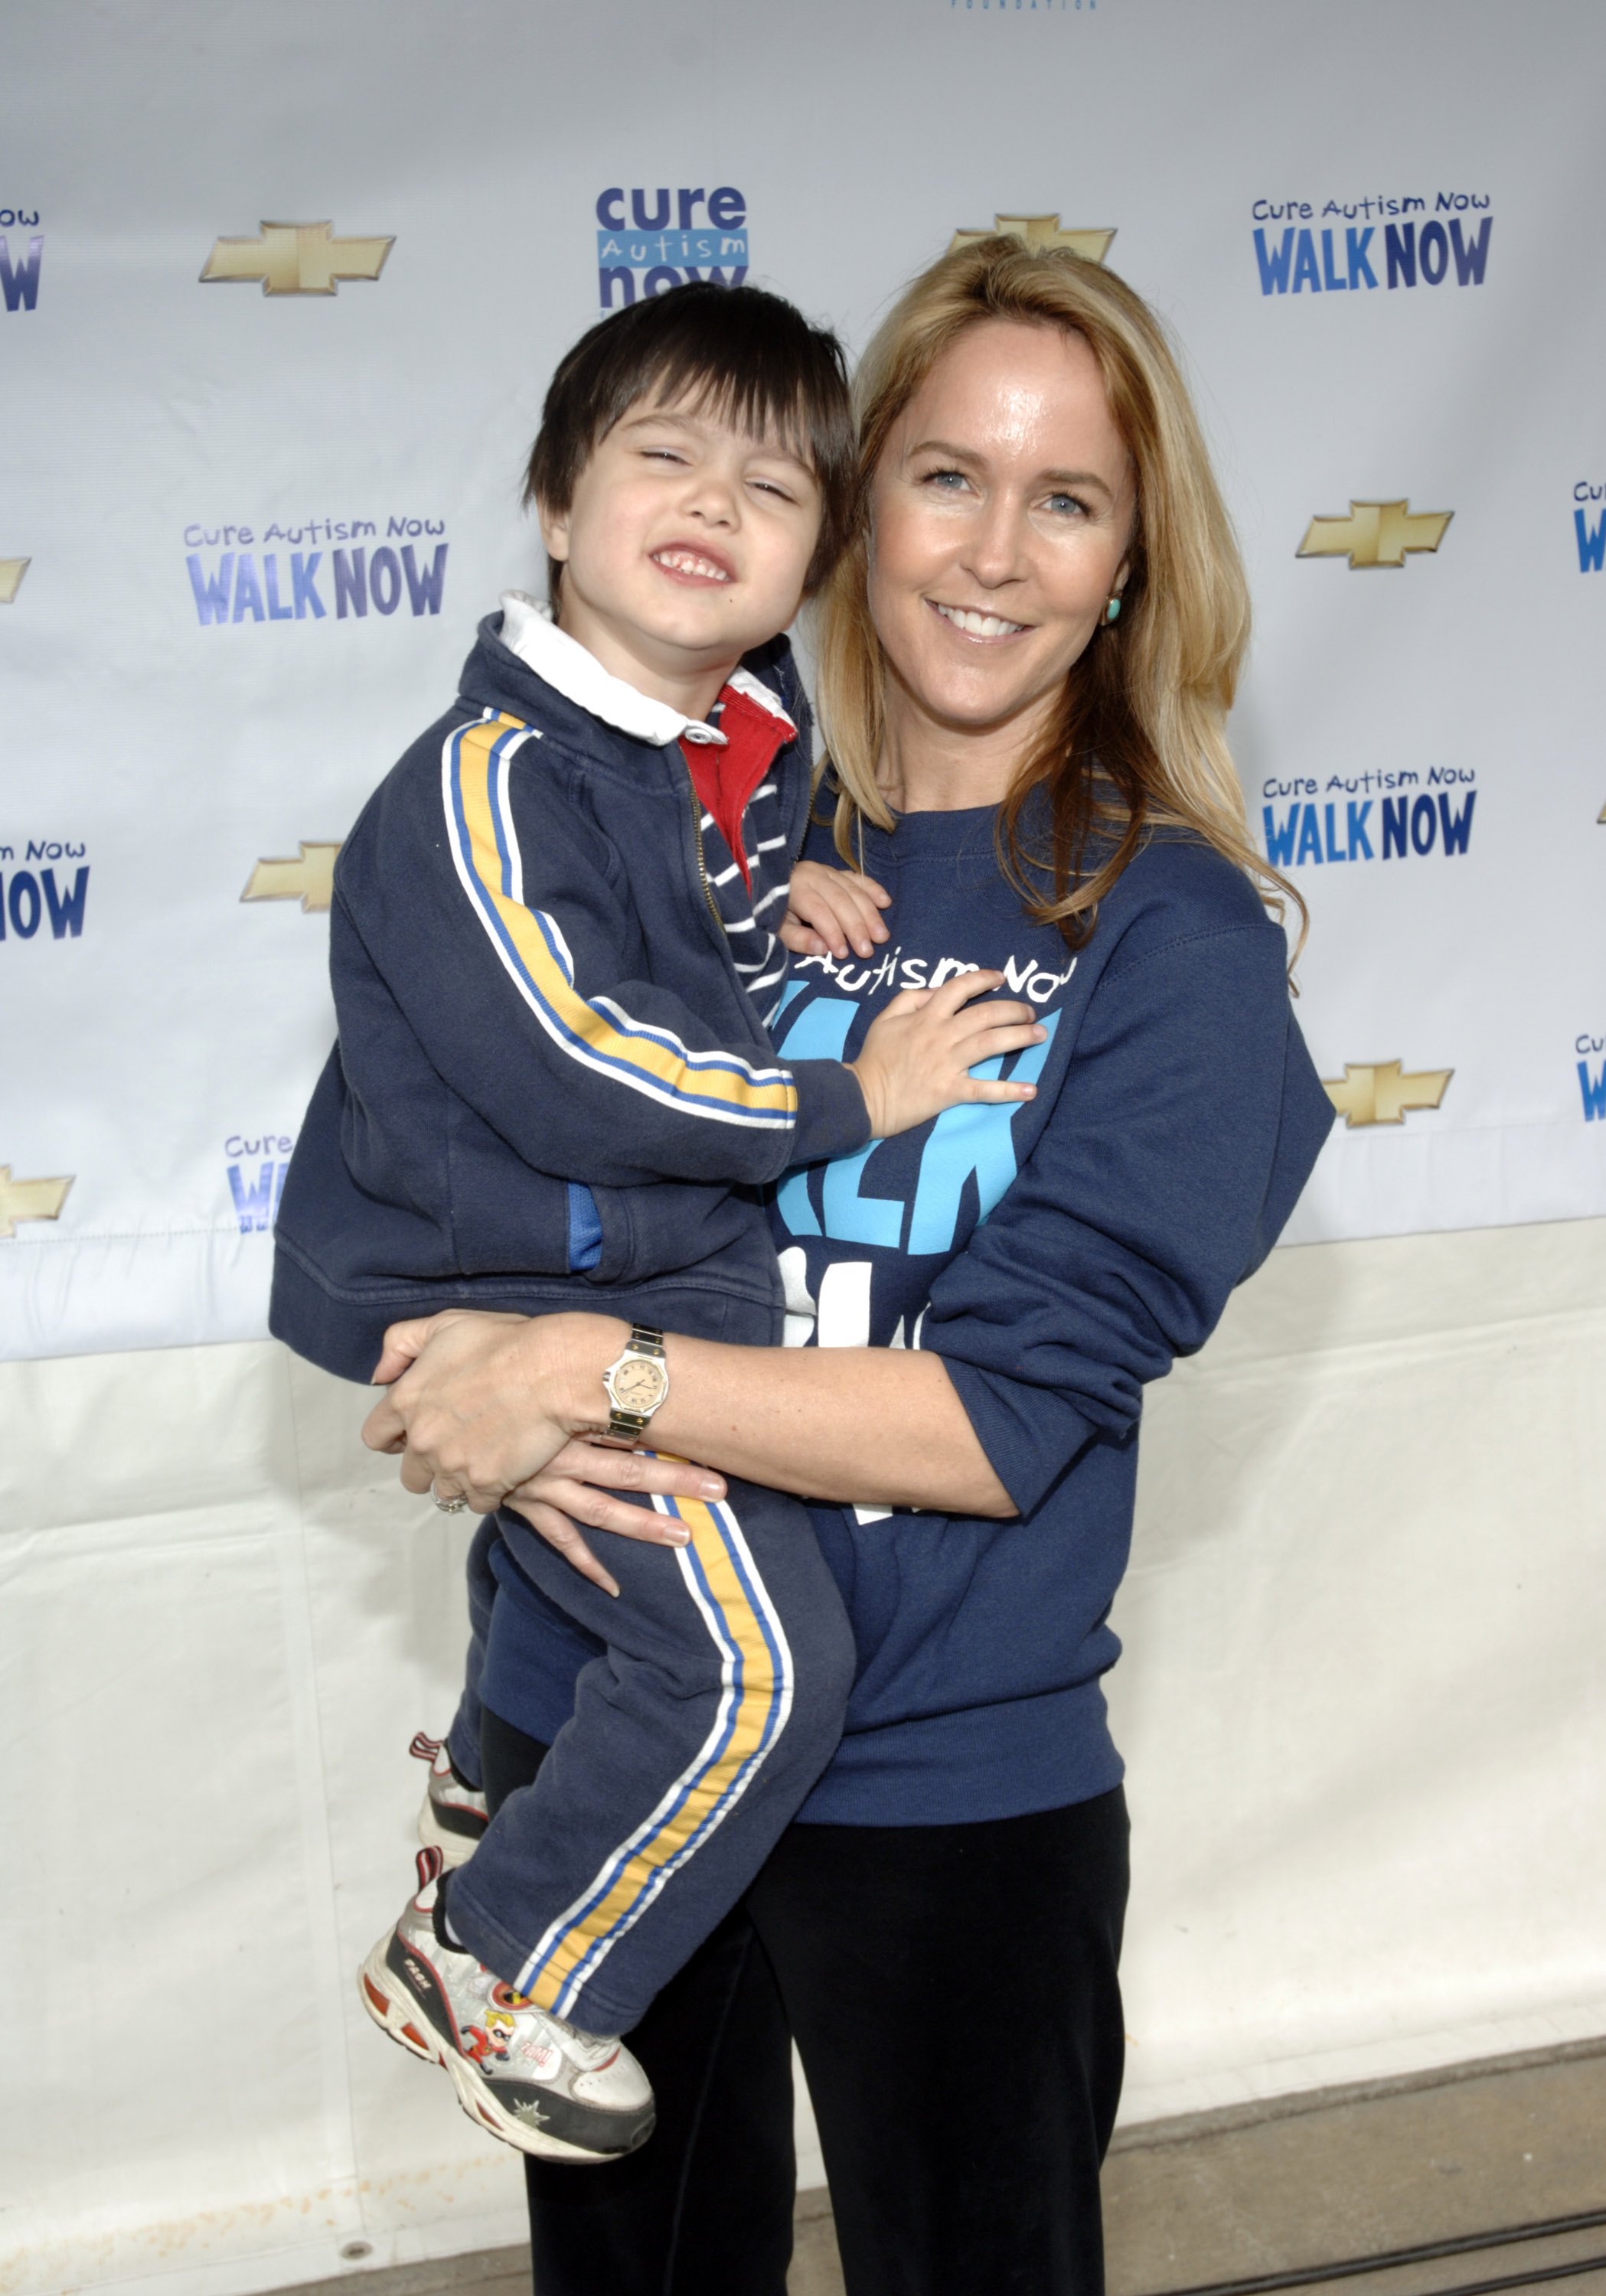 Erin Murphy with her son Parker at the CURE Autism Now 4th Annual Walk Now on April 22, 2006, in Pasadena, California. | Source: Getty Images